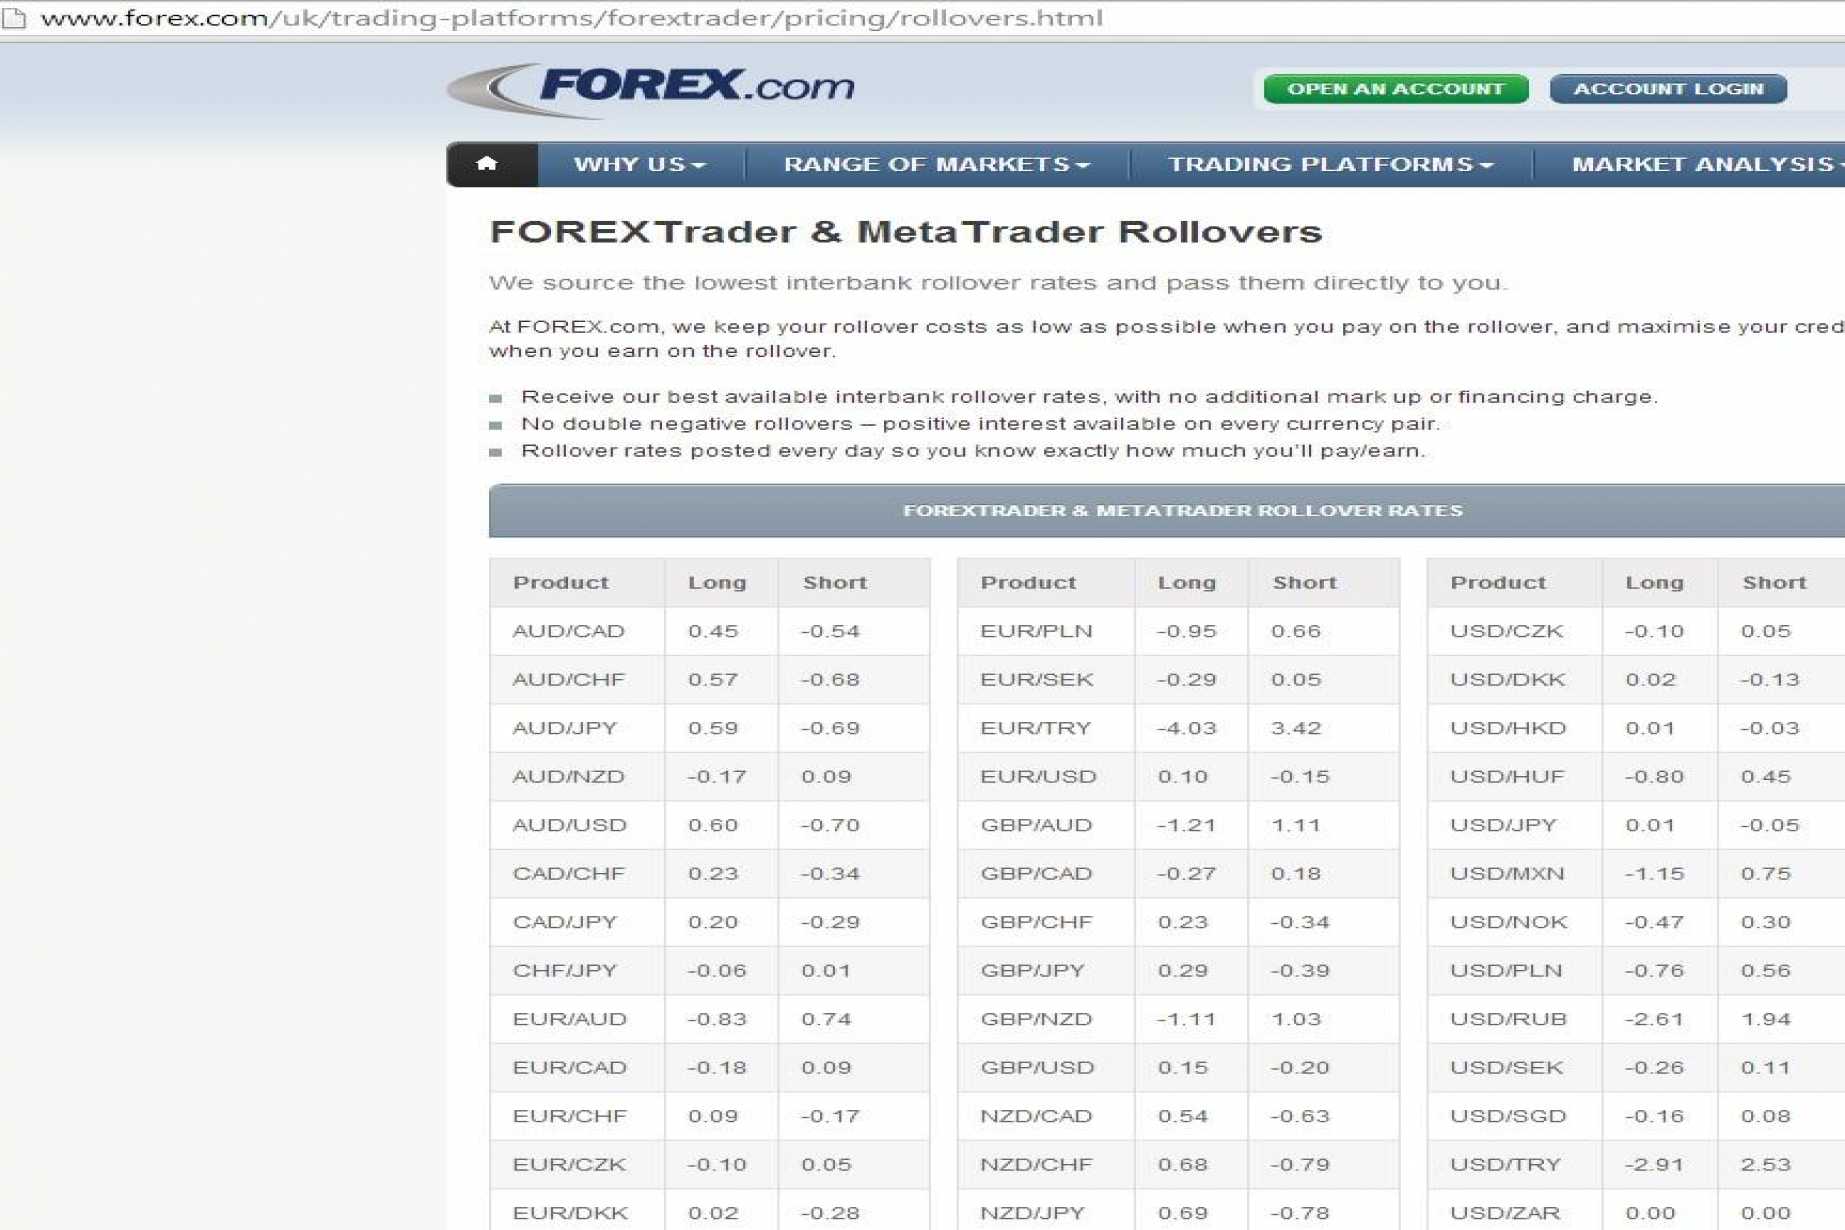 What Rollover Swap Rate And Spreads To Use For Forex Mt4 Backtest